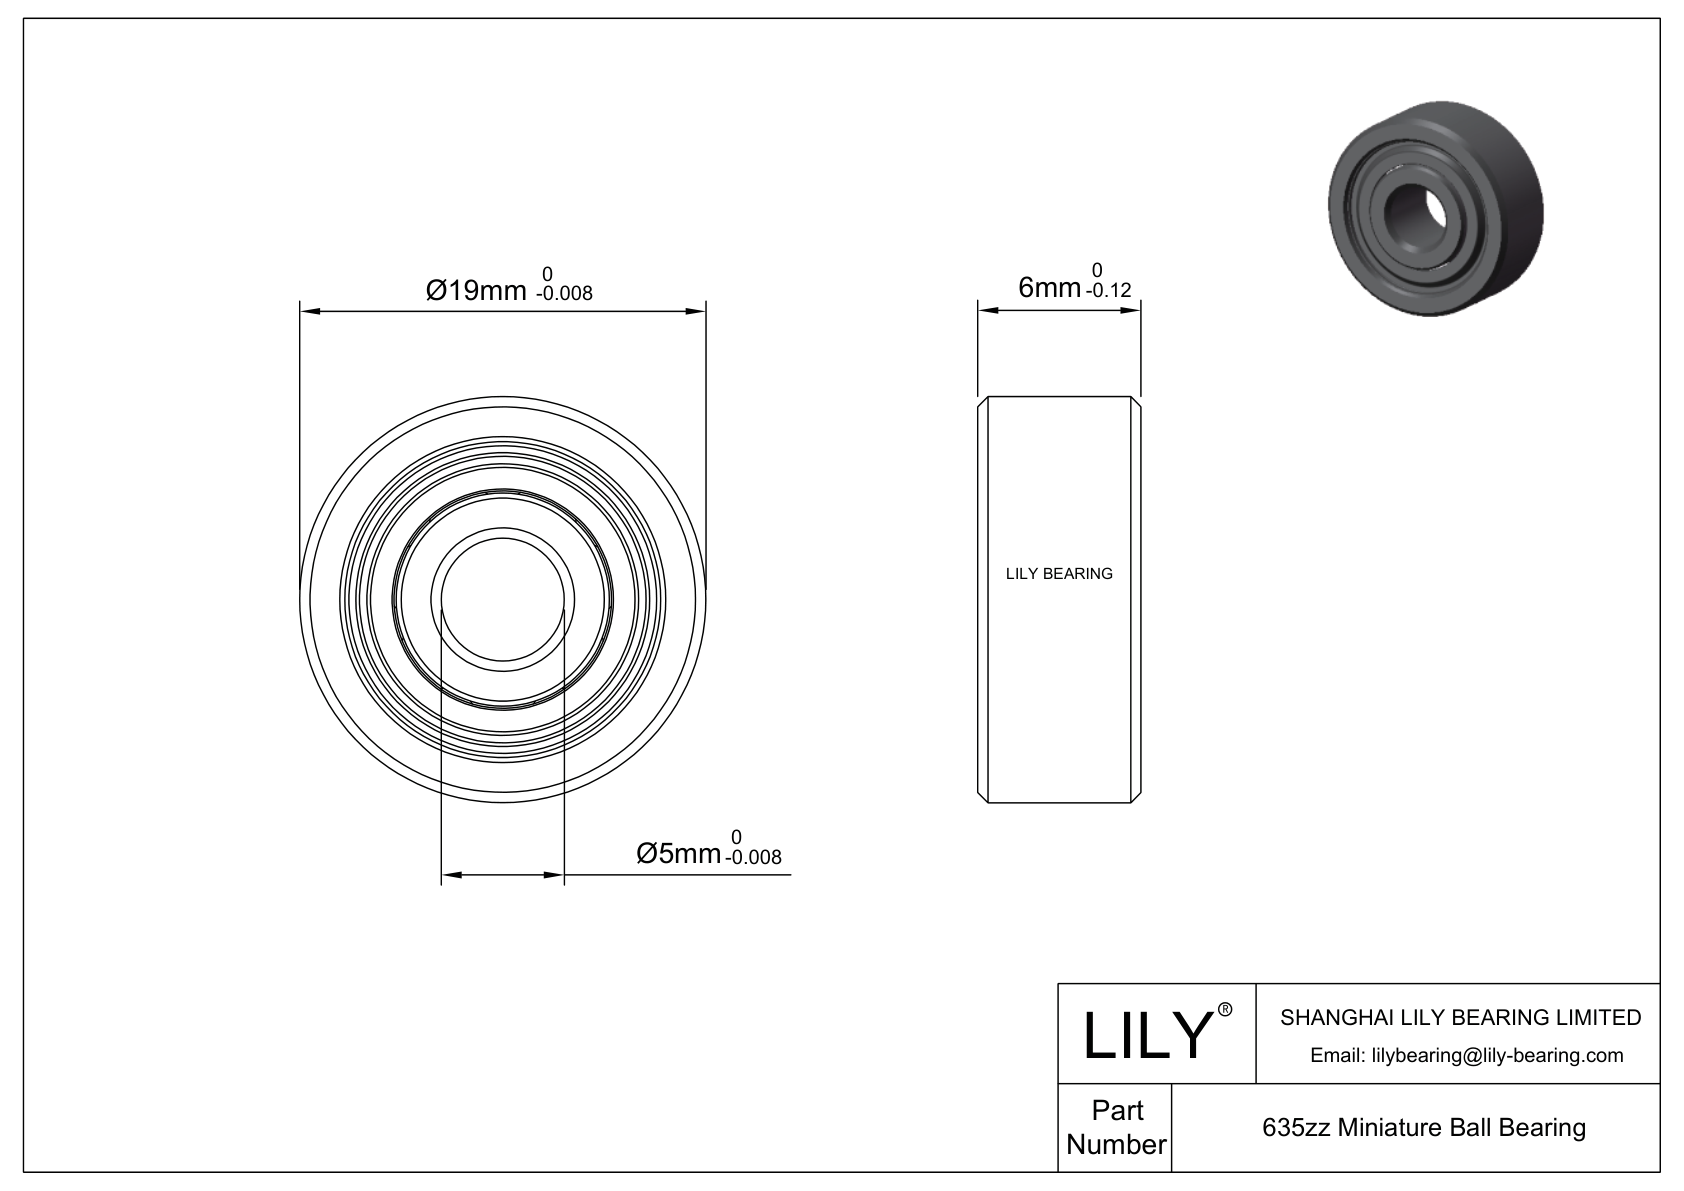 LILY-PUT63535-30 Outsourcing Polyurethane bearings cad drawing